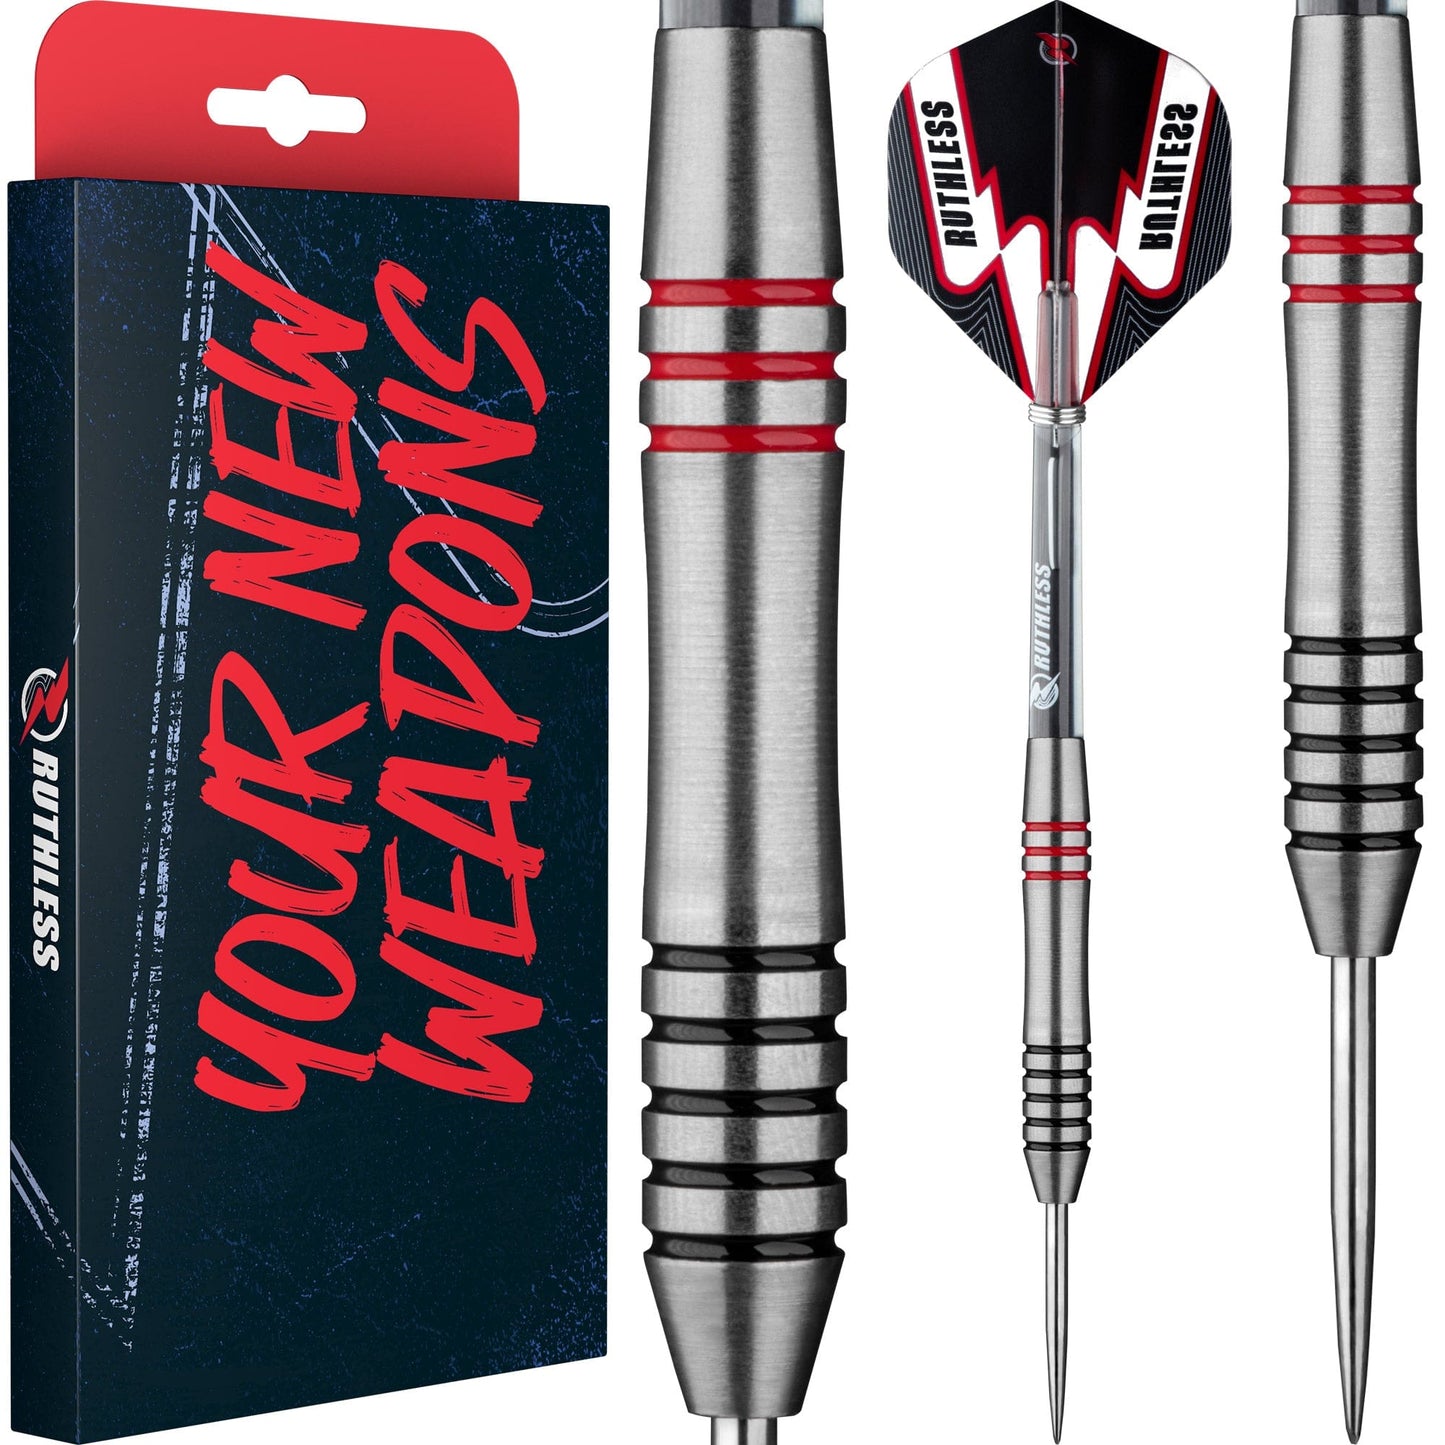 Ruthless Scallop Darts - Steel Tip - Twin Ring - Black & Red - 24g 24g